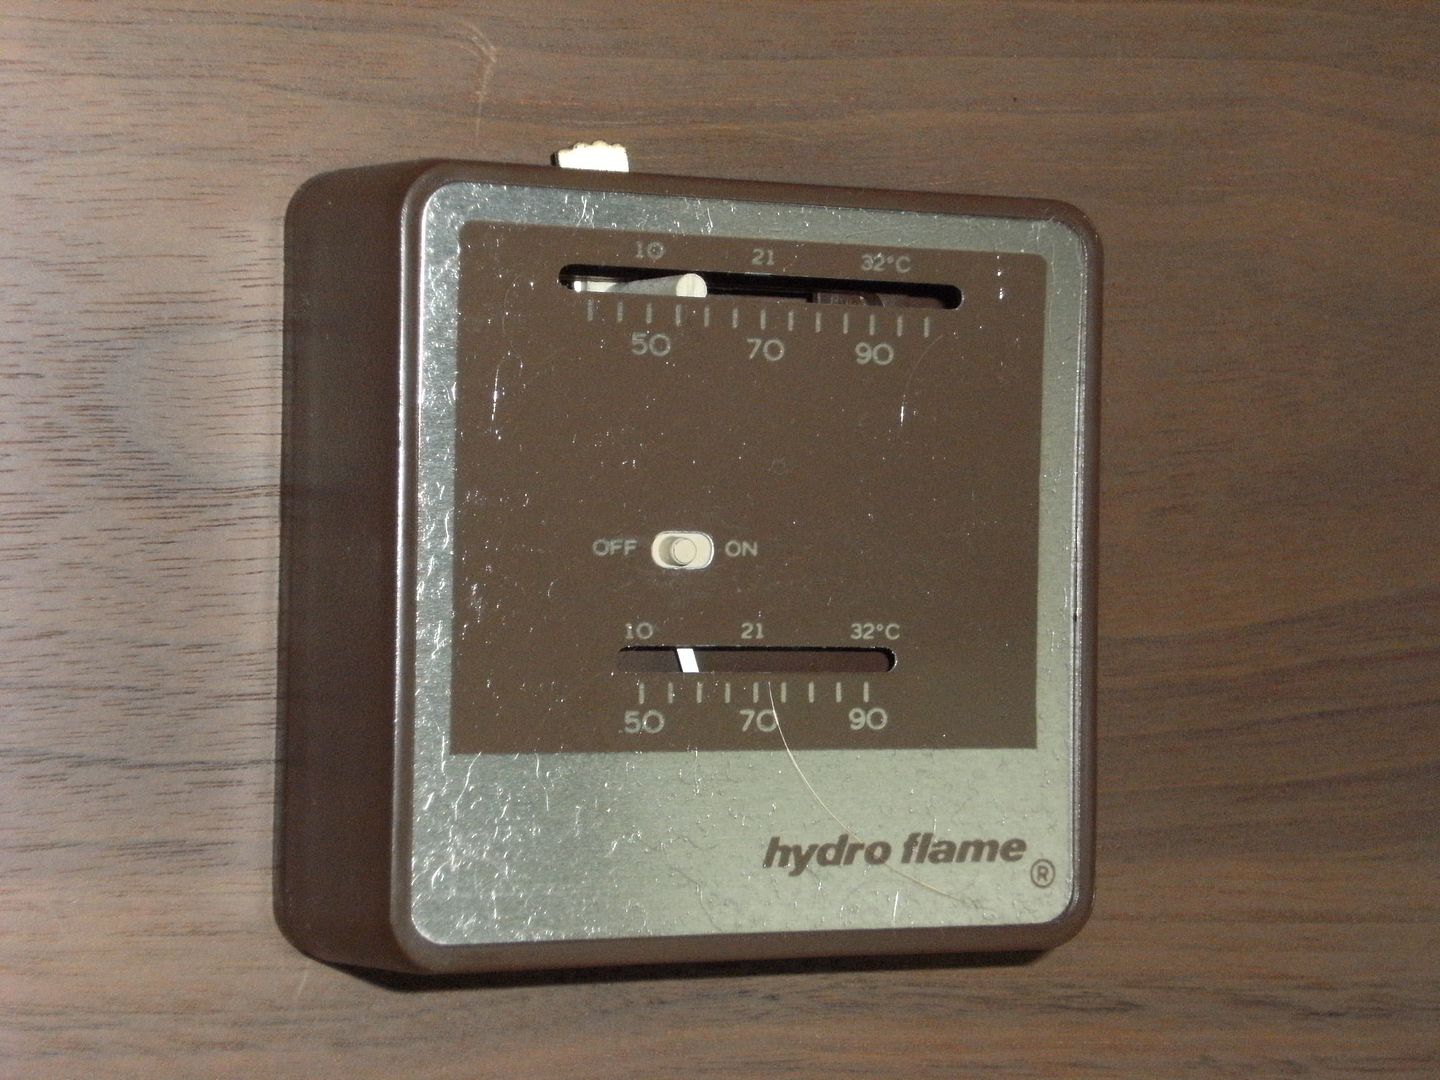 Hydroflame thermostats Topic